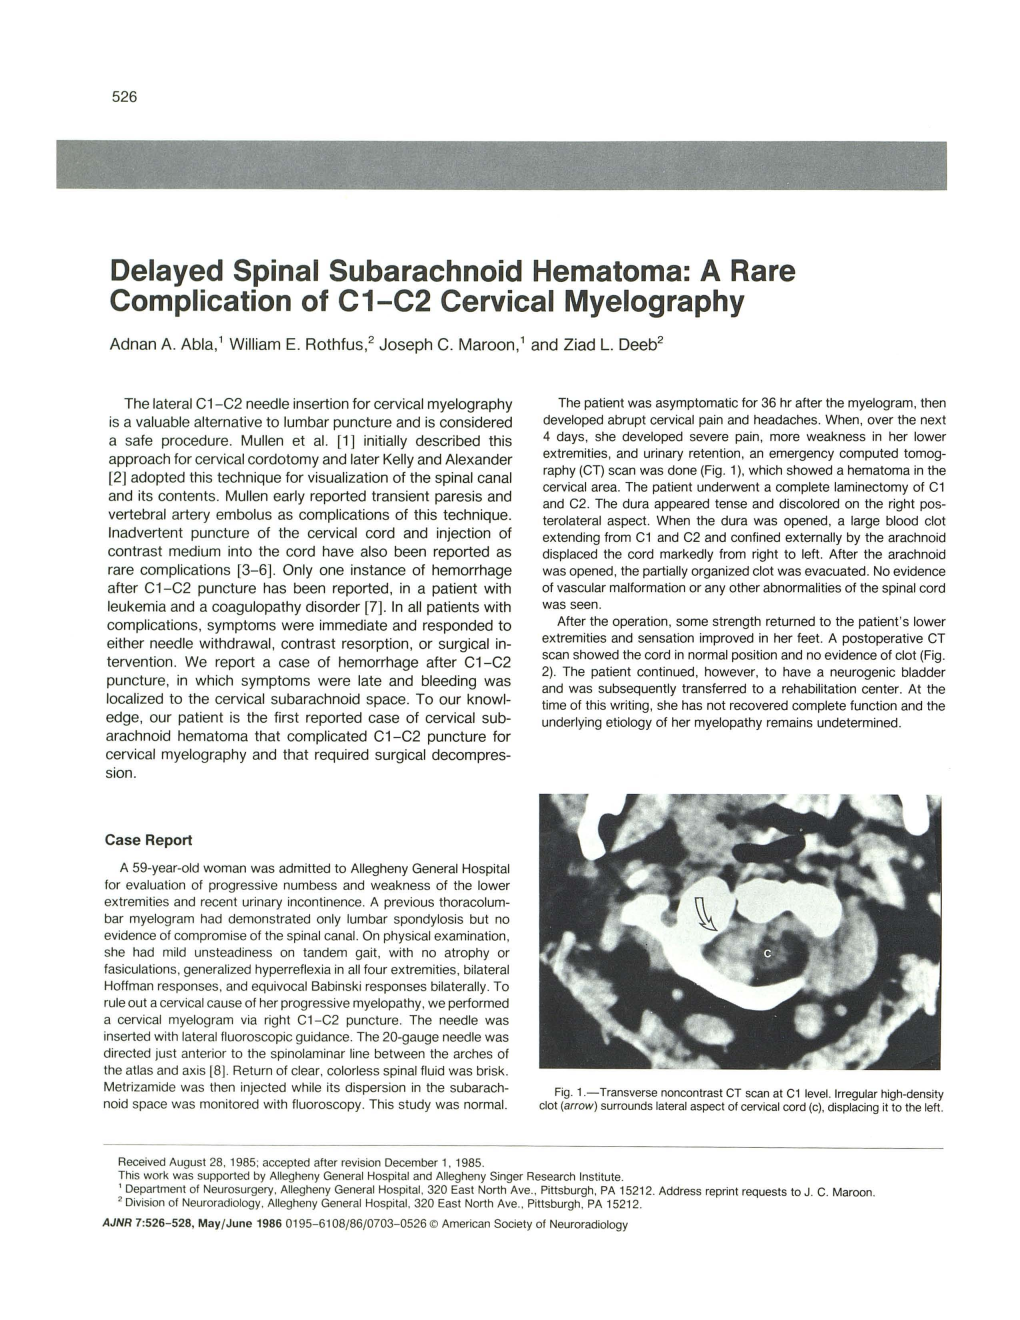 Delayed Spinal Subarachnoid Hematoma: a Rare Complication of C1-C2 Cervical Myelography